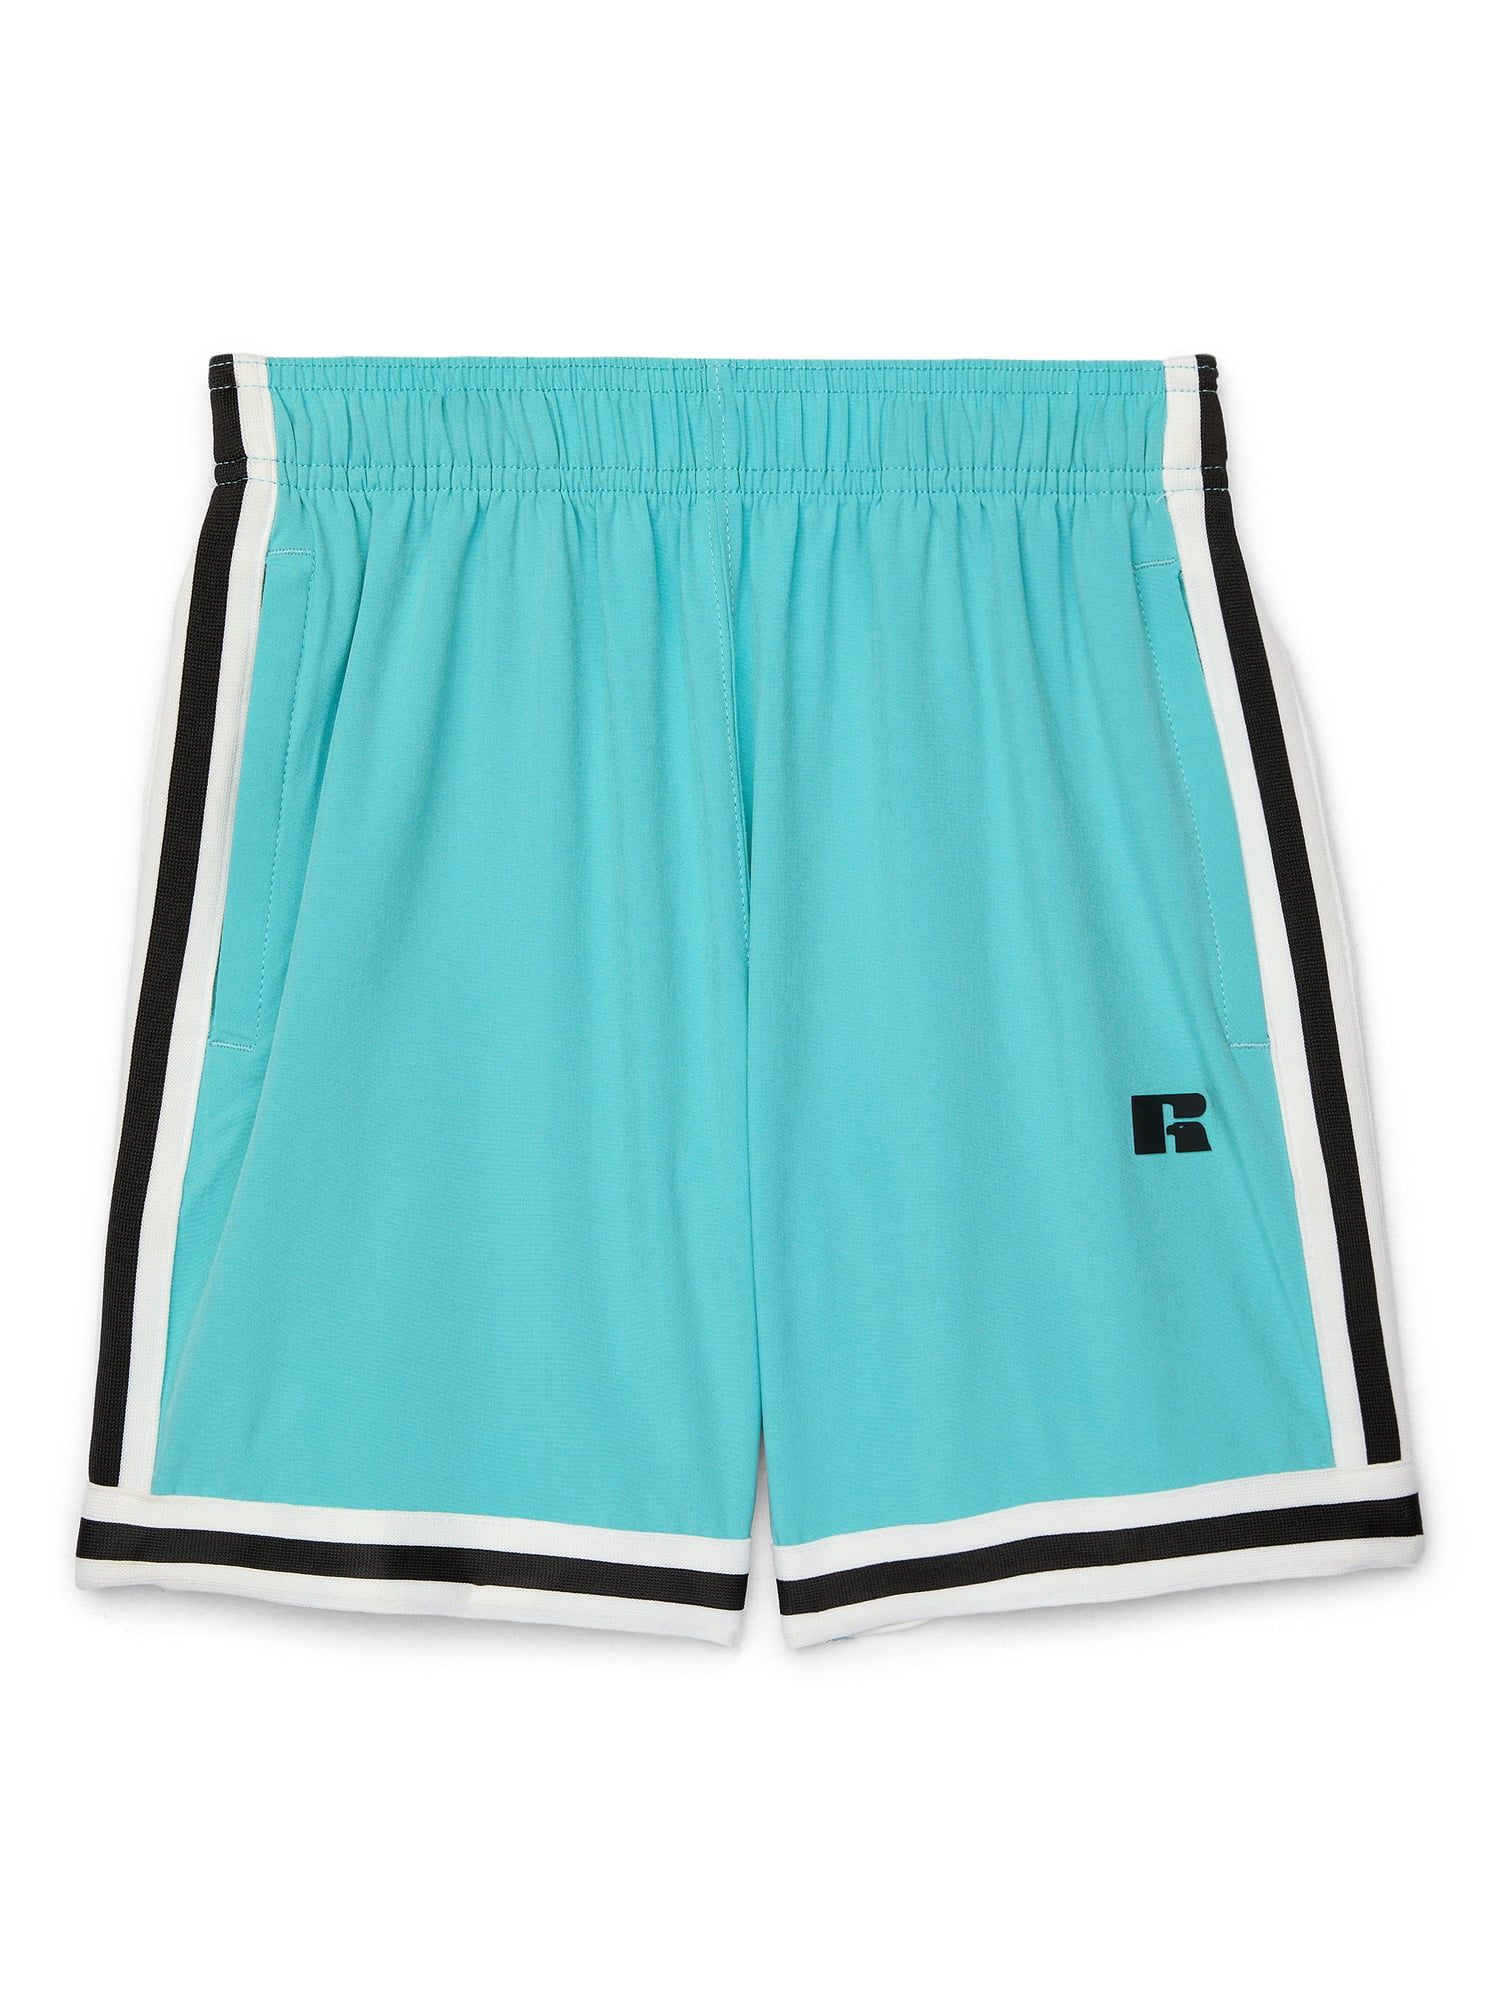 Russell Athletic Boys Active Woven Basketball Short, Sizes 4-18 & Husky ...